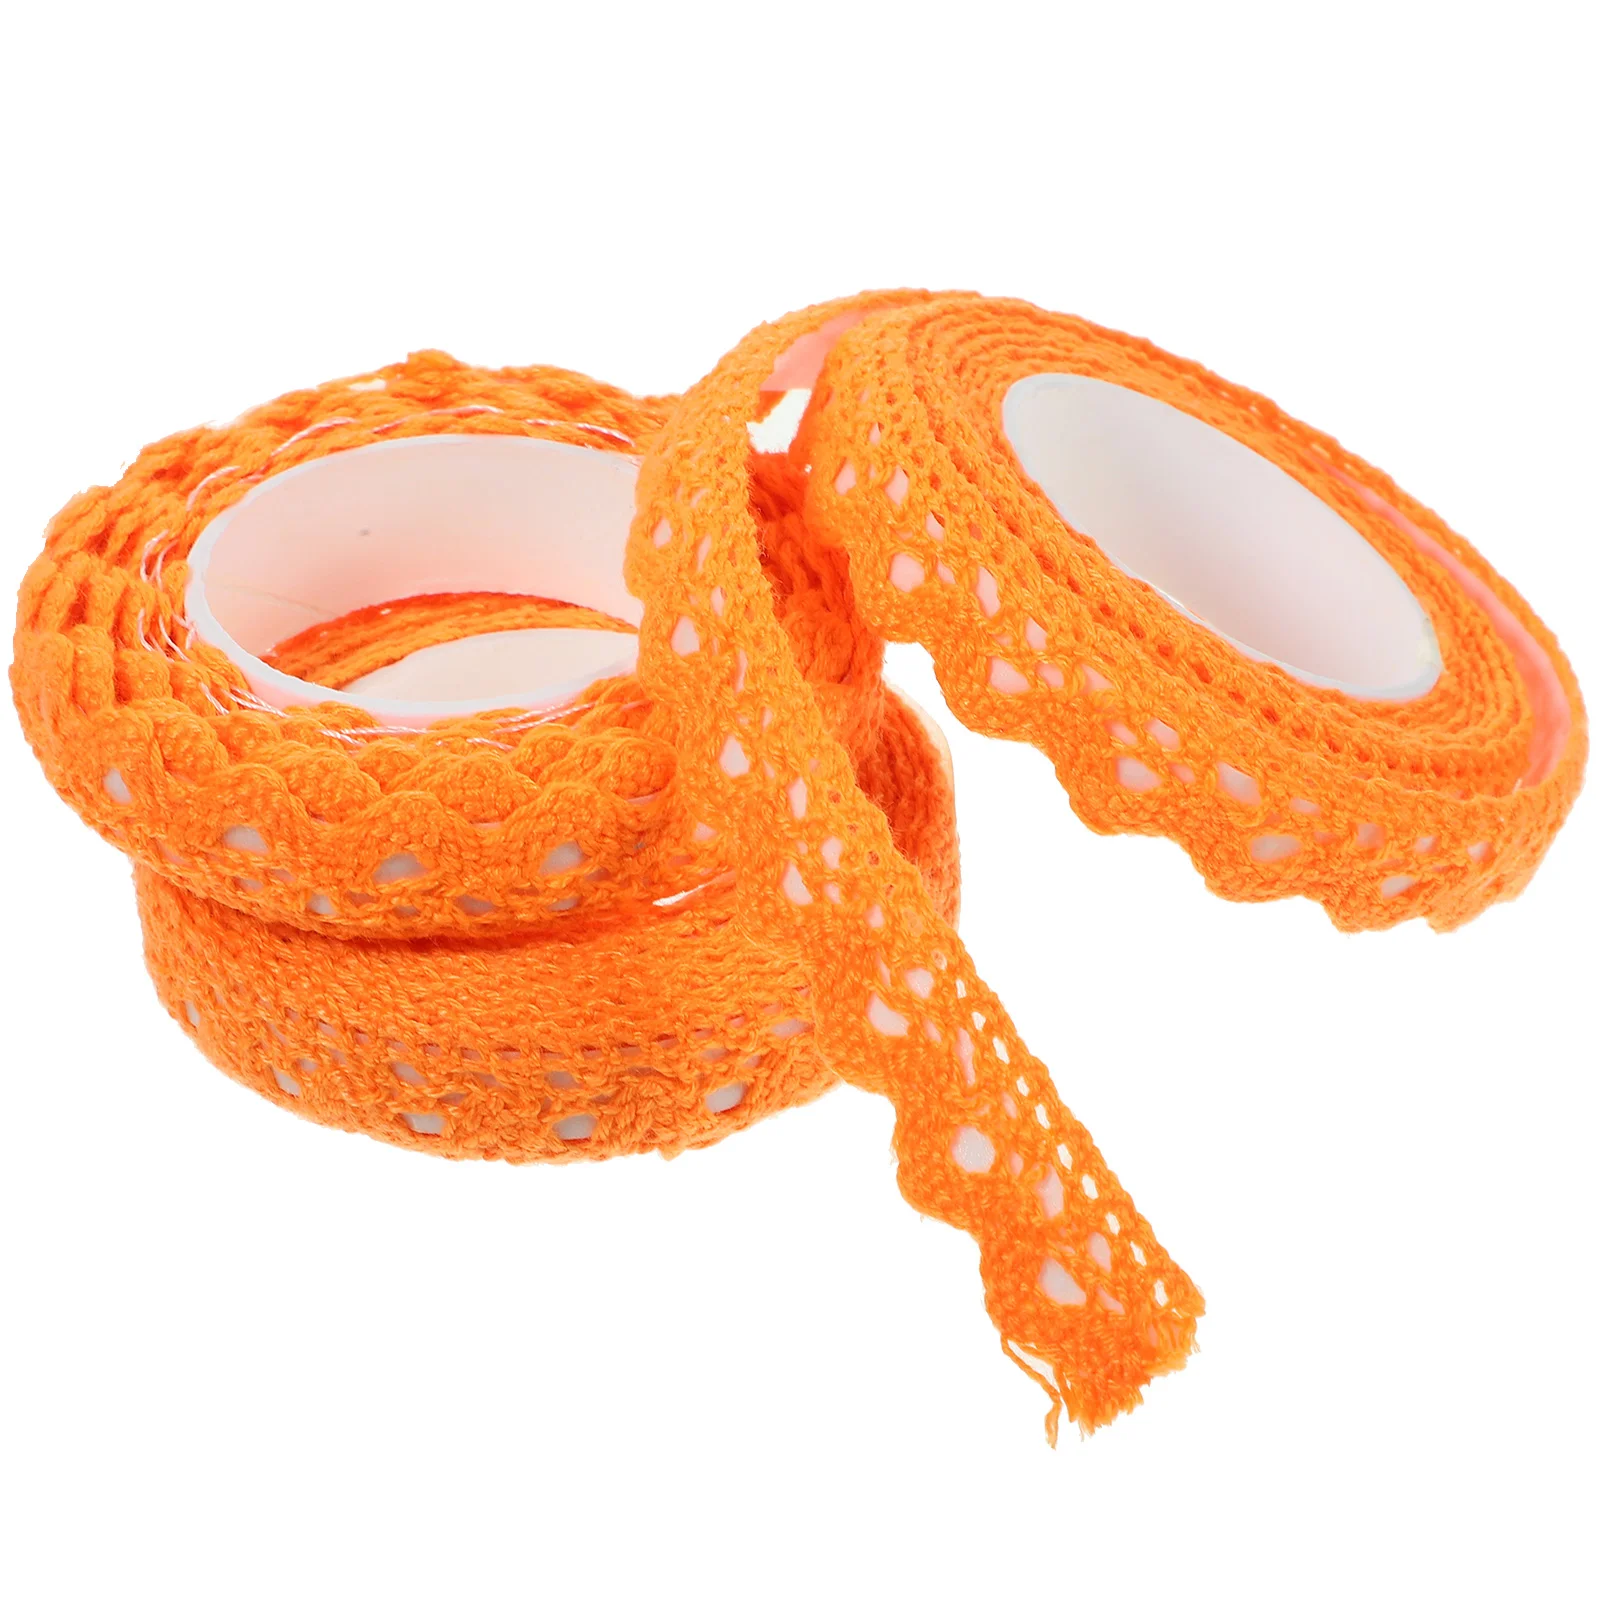 

3 Rolls Elegant Lace Tape Crafting DIY Lace Tape Scrapbooking Lace Trim Tape Decorating Lace Tape